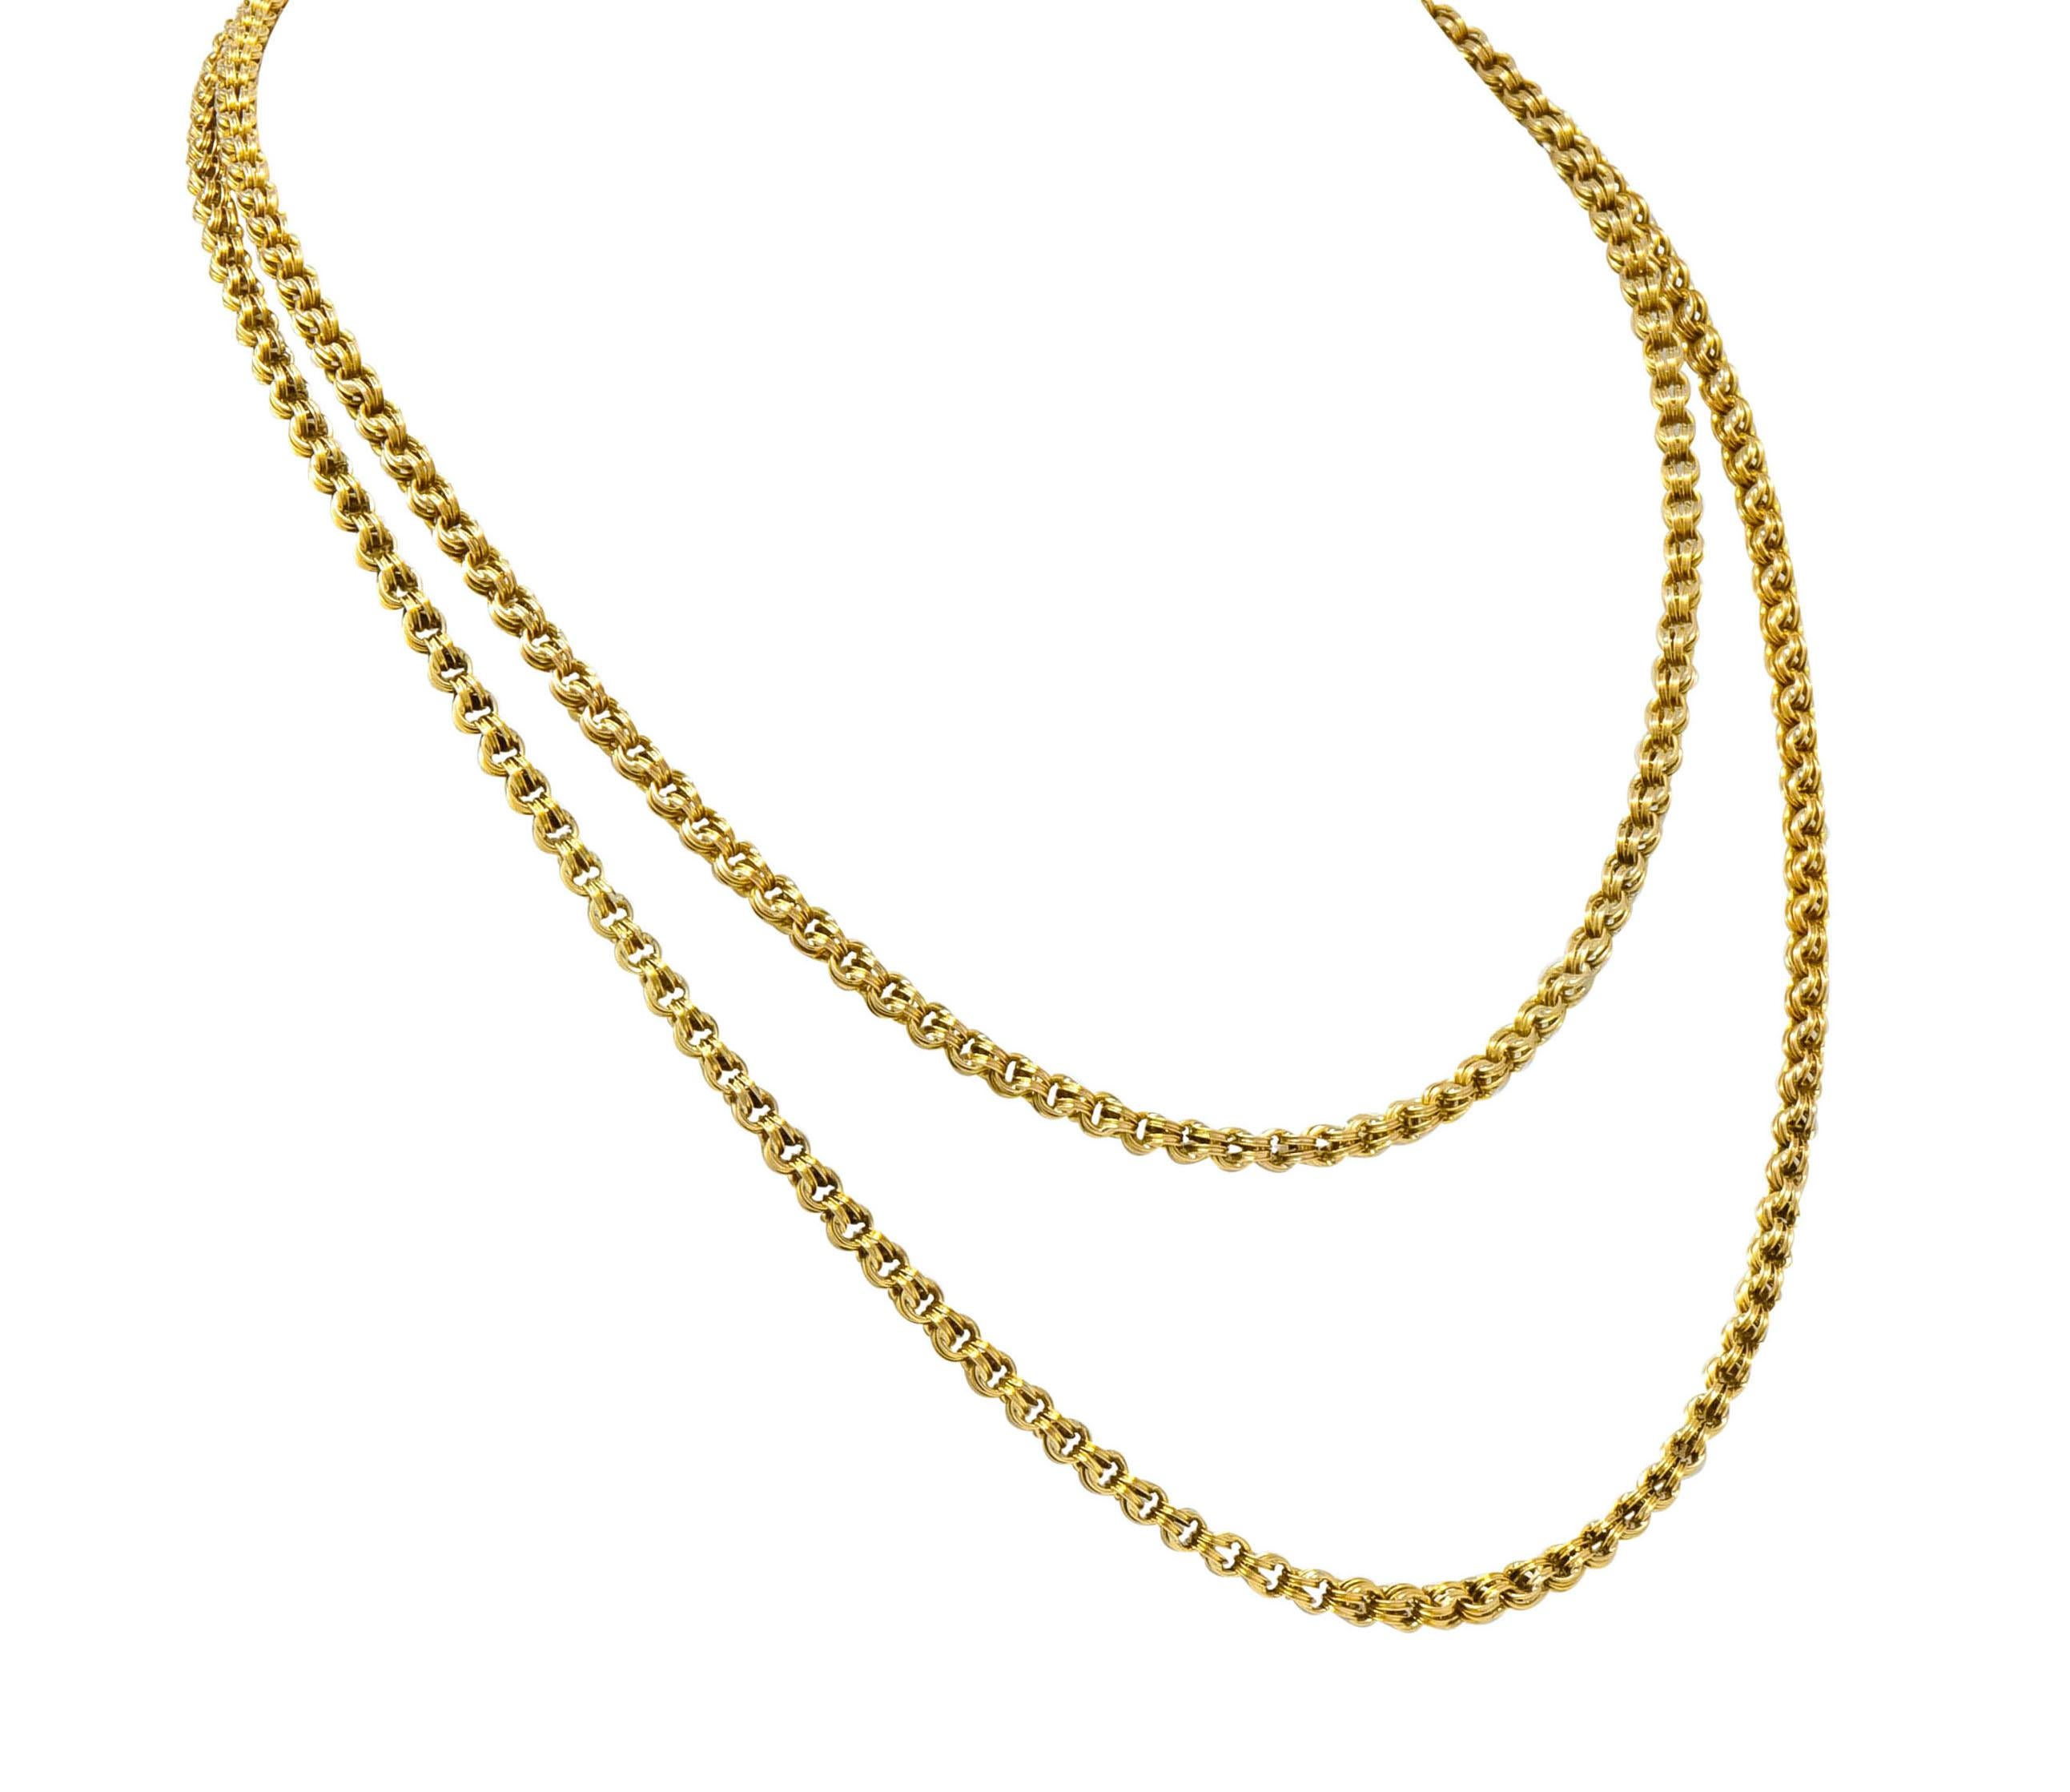 Rolo style chain necklace comprised of doubled round links that are deeply grooved

Completed by a barrel clasp featuring decorative black enamel detail

Tested as 10 karat gold

Length: 34 inches

Width at widest: 3/16 inch

Total weight: 21.0